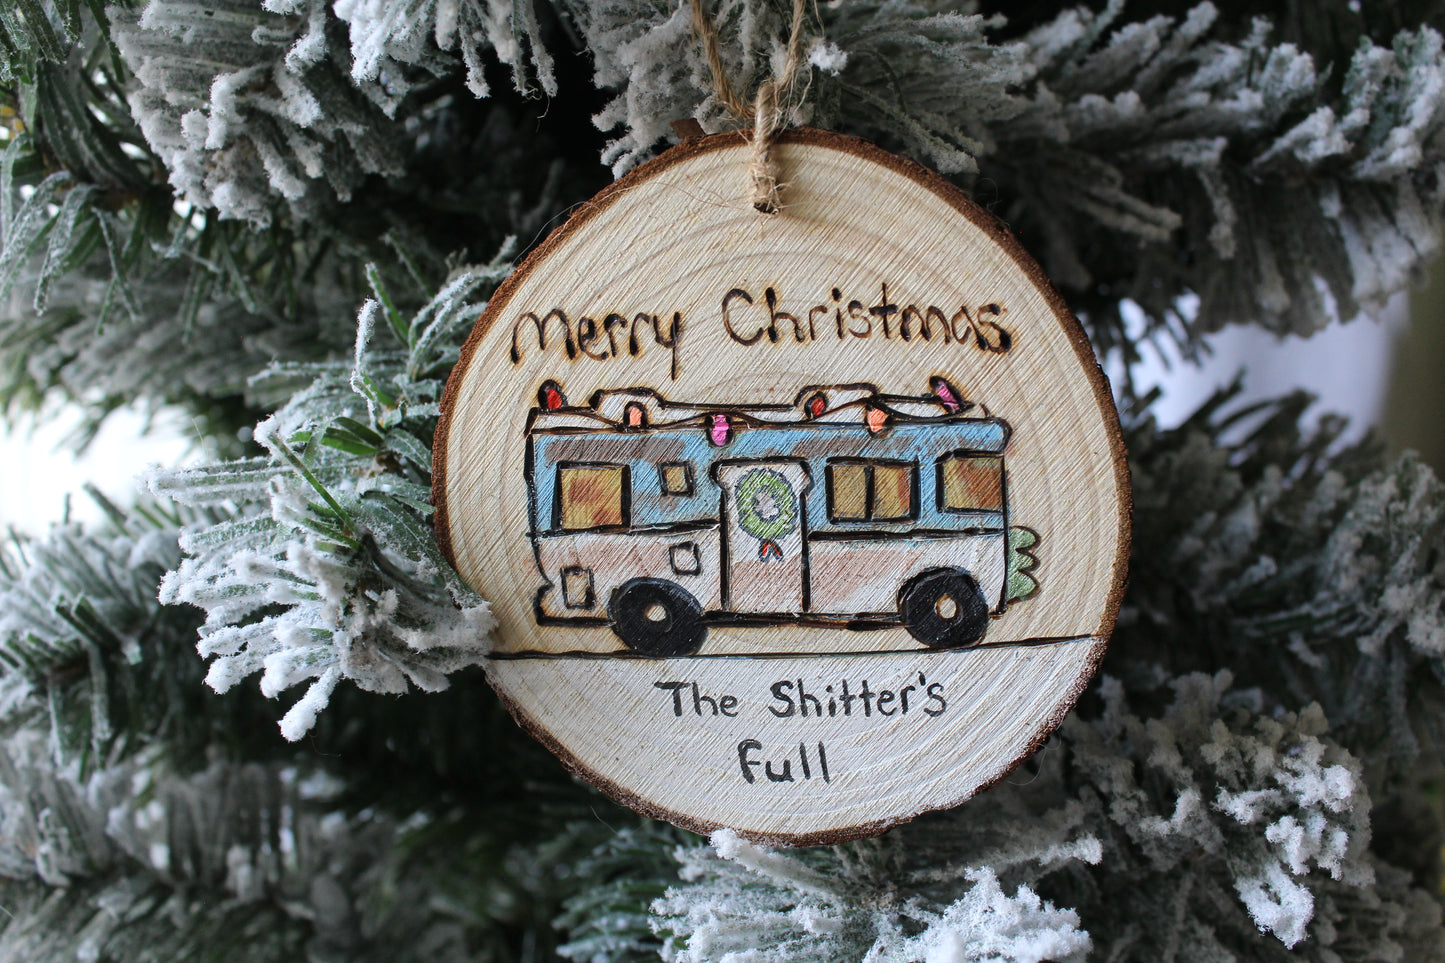 National Lampoons Christmas Vacation Shitter's Full RV ornament cousin Eddie